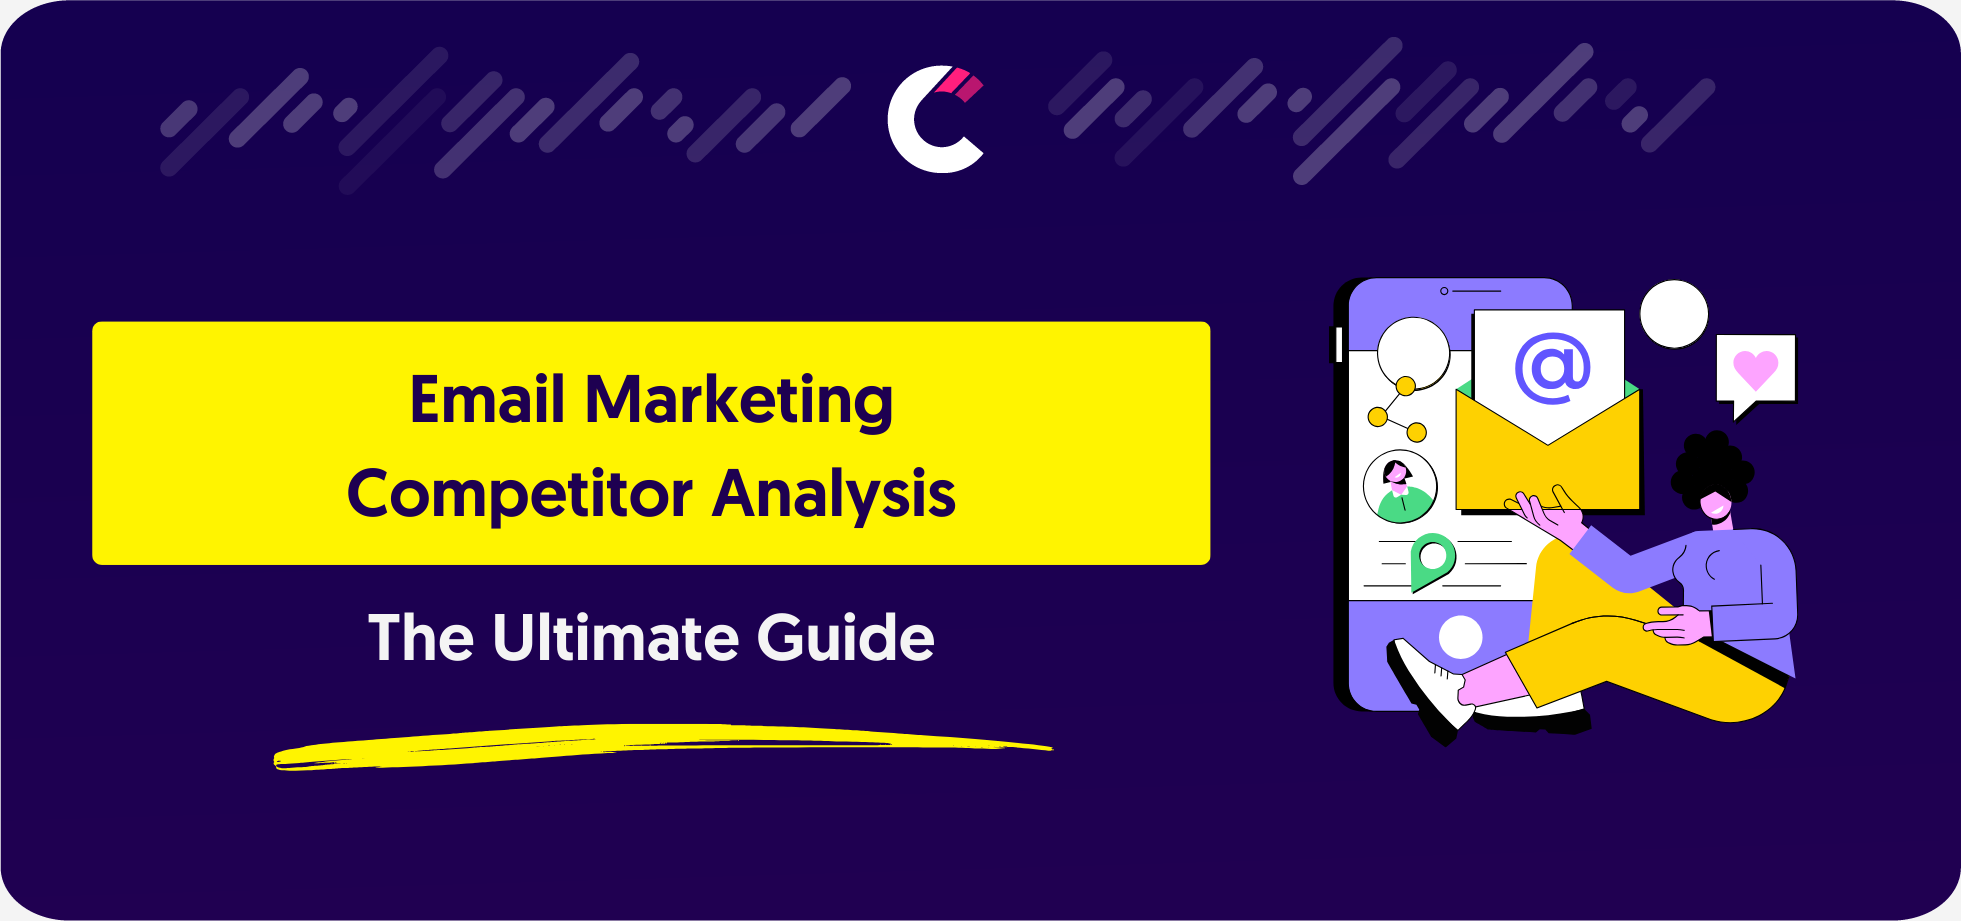 Email Marketing Competitor Analysis The Ultimate Guide